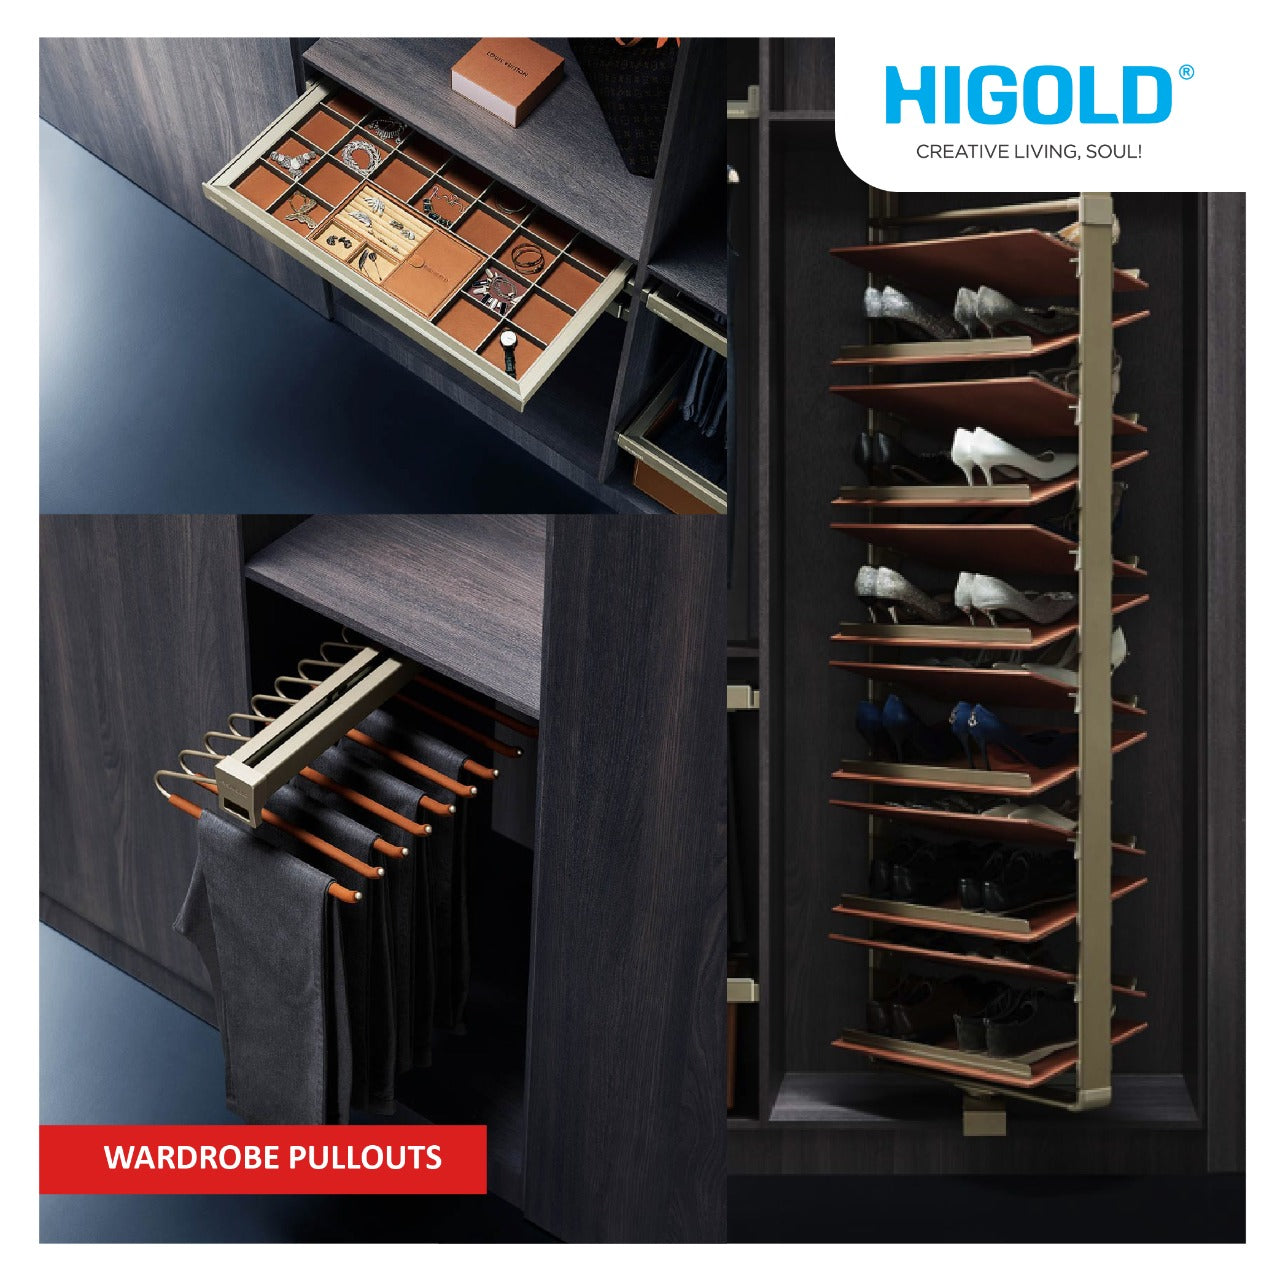 Higold wardrobe pullouts - optimize your wardrobe space with stylish and functional storage solutions.